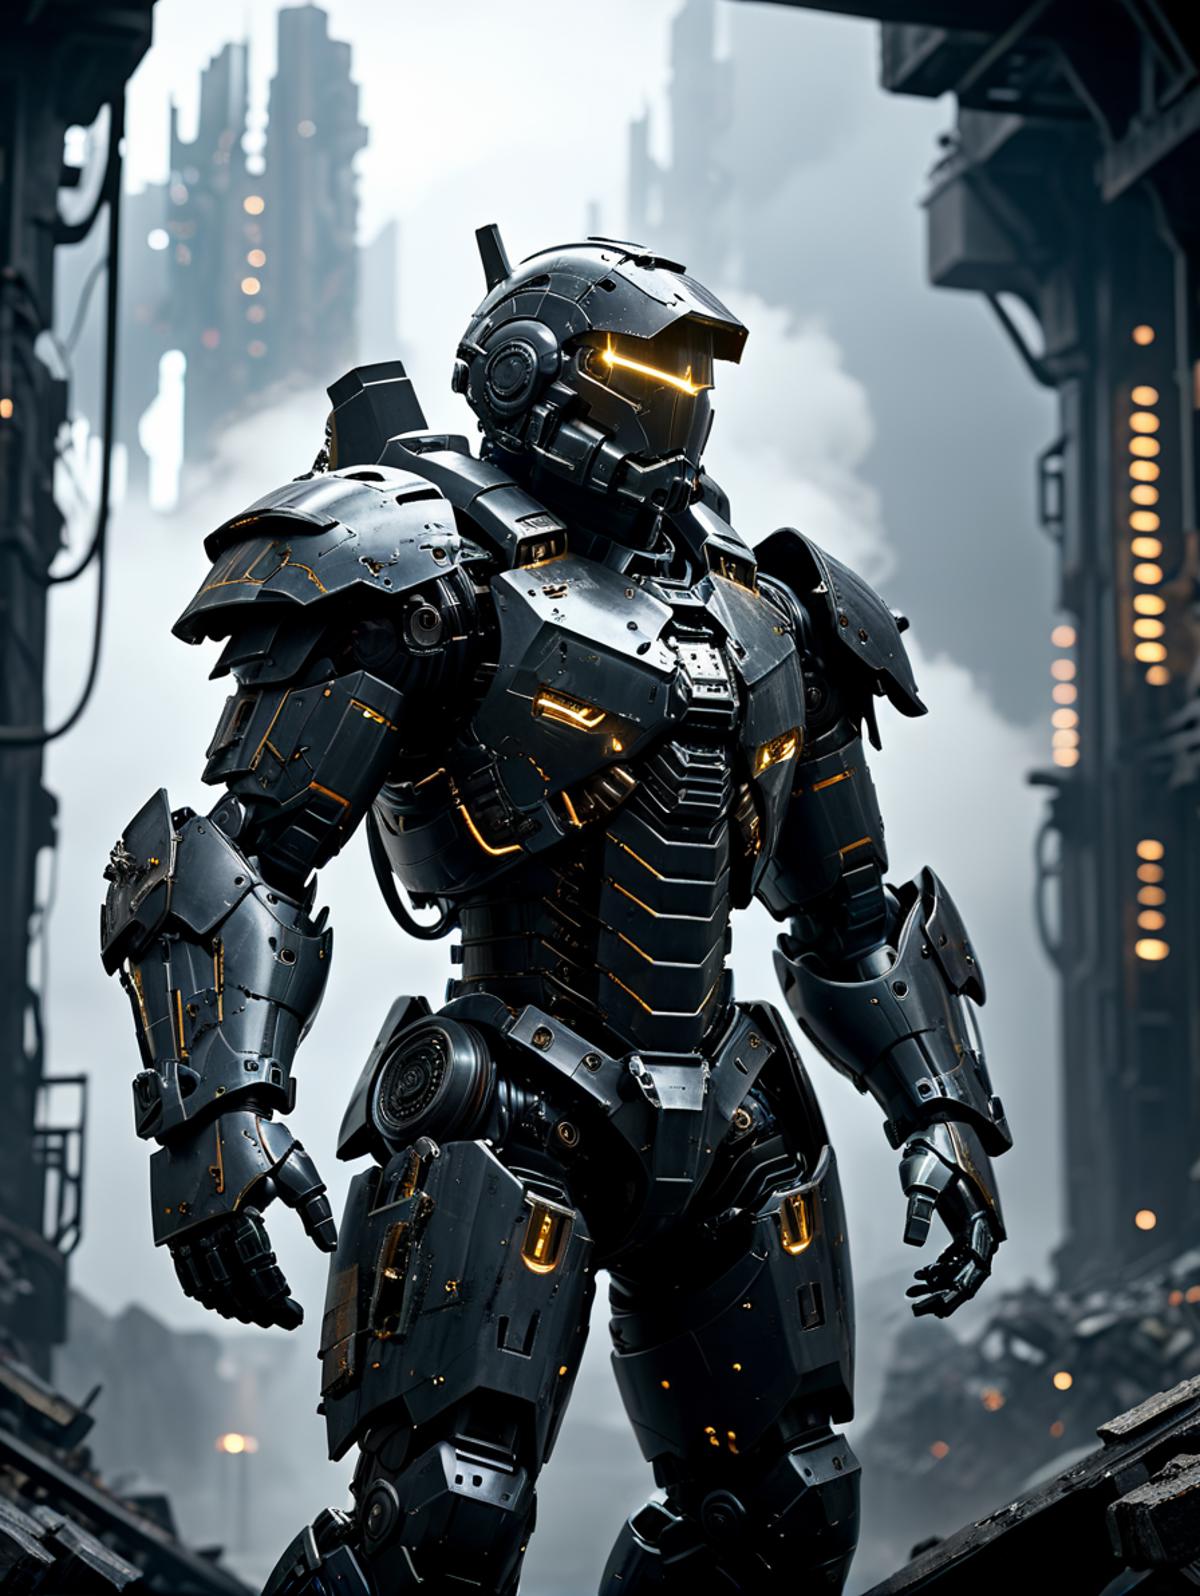 Futuristic Robot Suit with Yellow Eyes and Armor in a Dark Industrial Setting